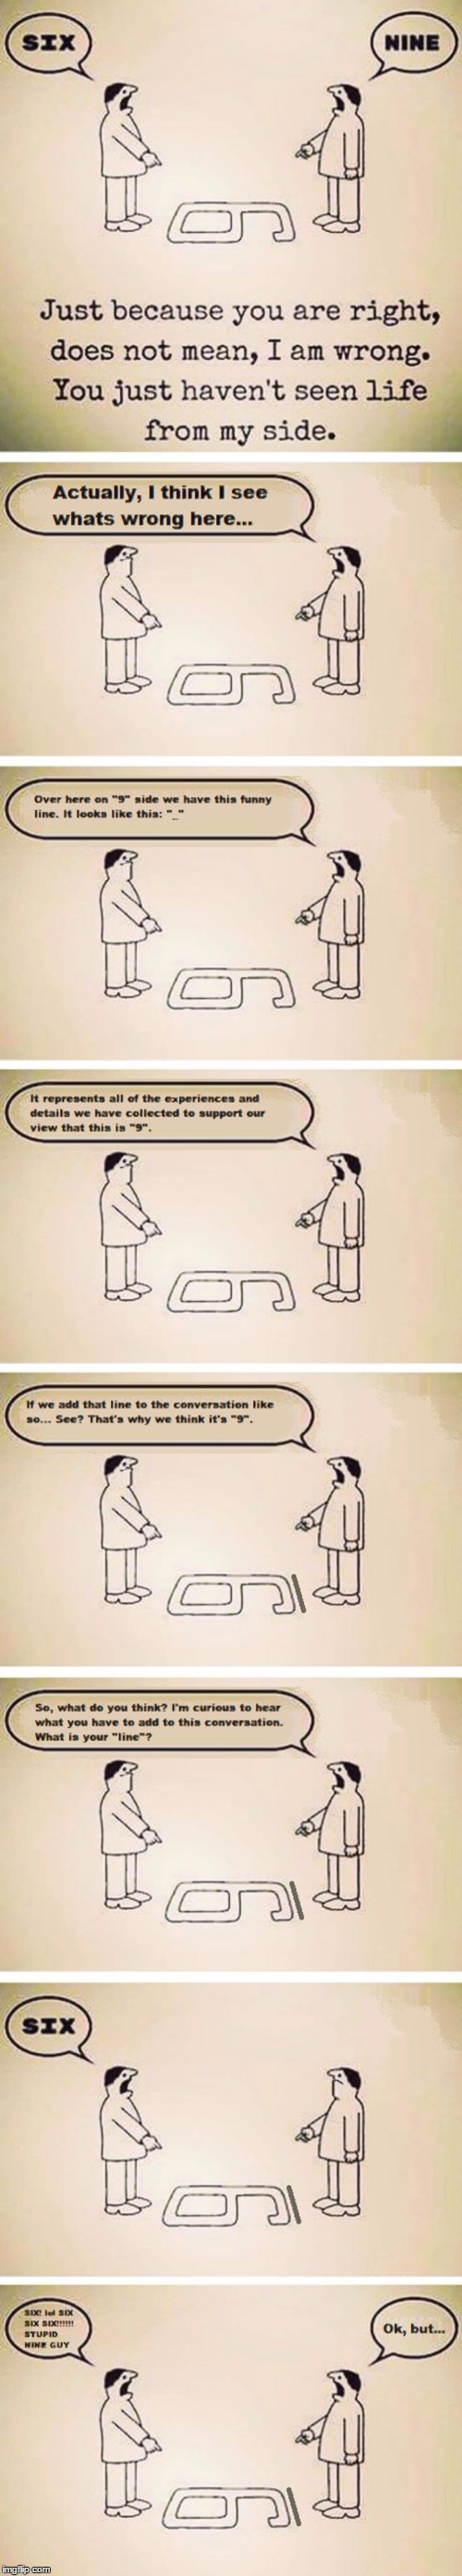 Internet arguments be like... | image tagged in internet,argument,funny,true,cartoon,comic | made w/ Imgflip meme maker